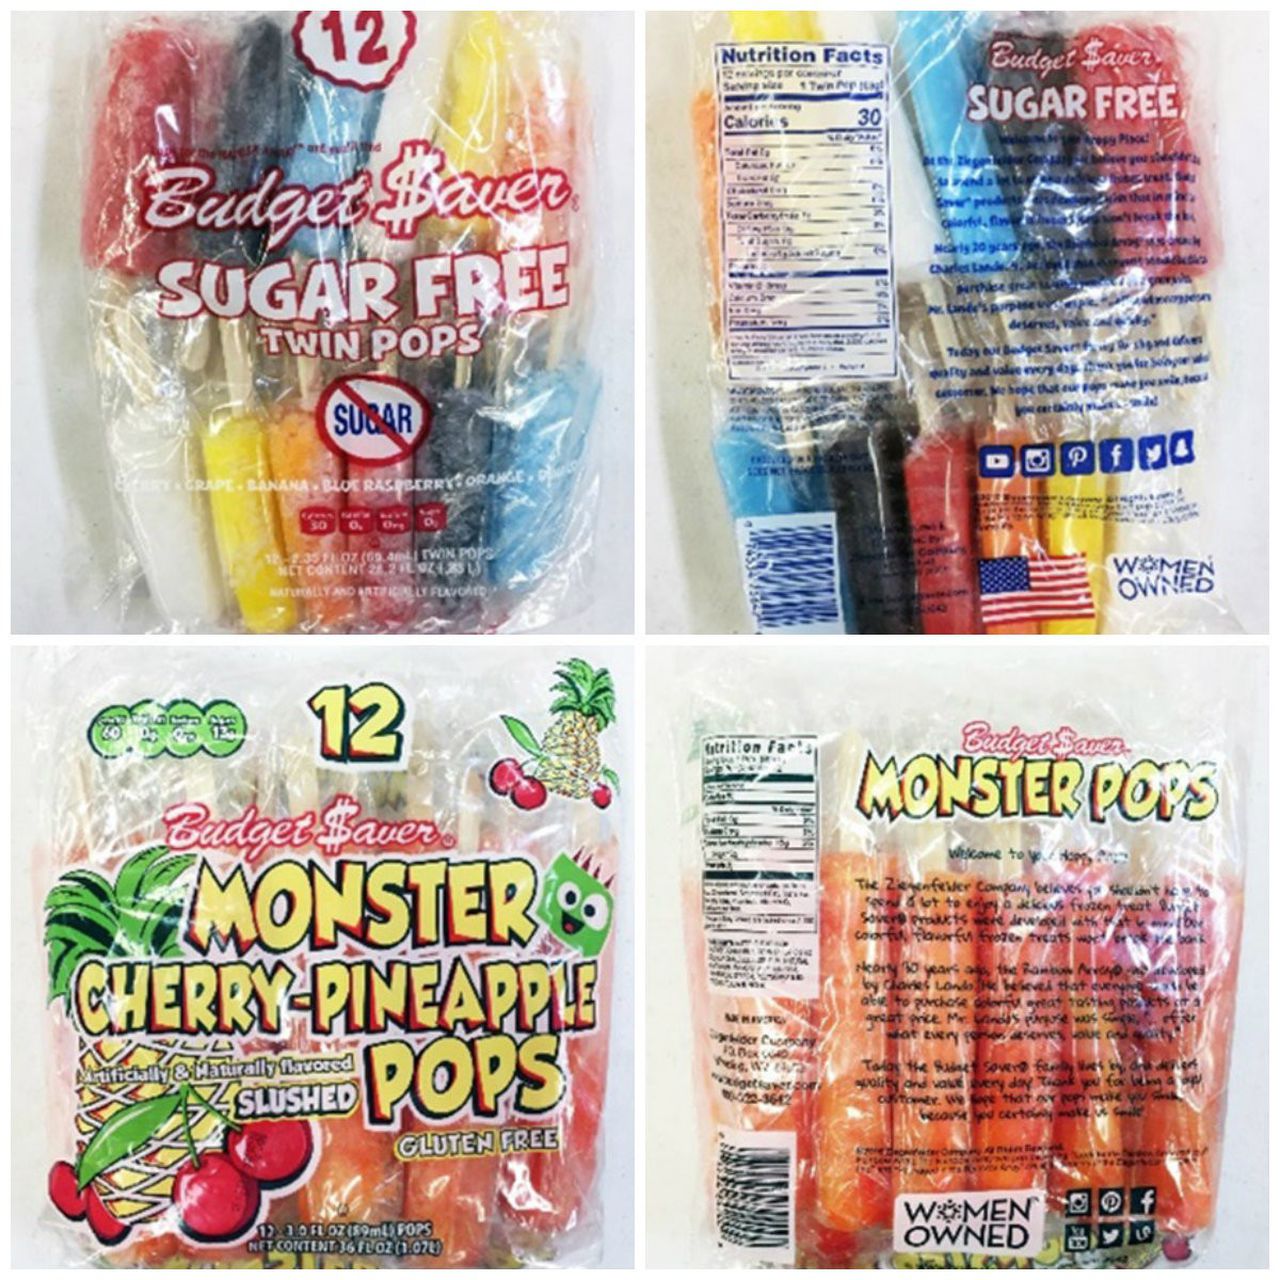 Recall of Budget $aver and Sugar Free Twin Pops for ...